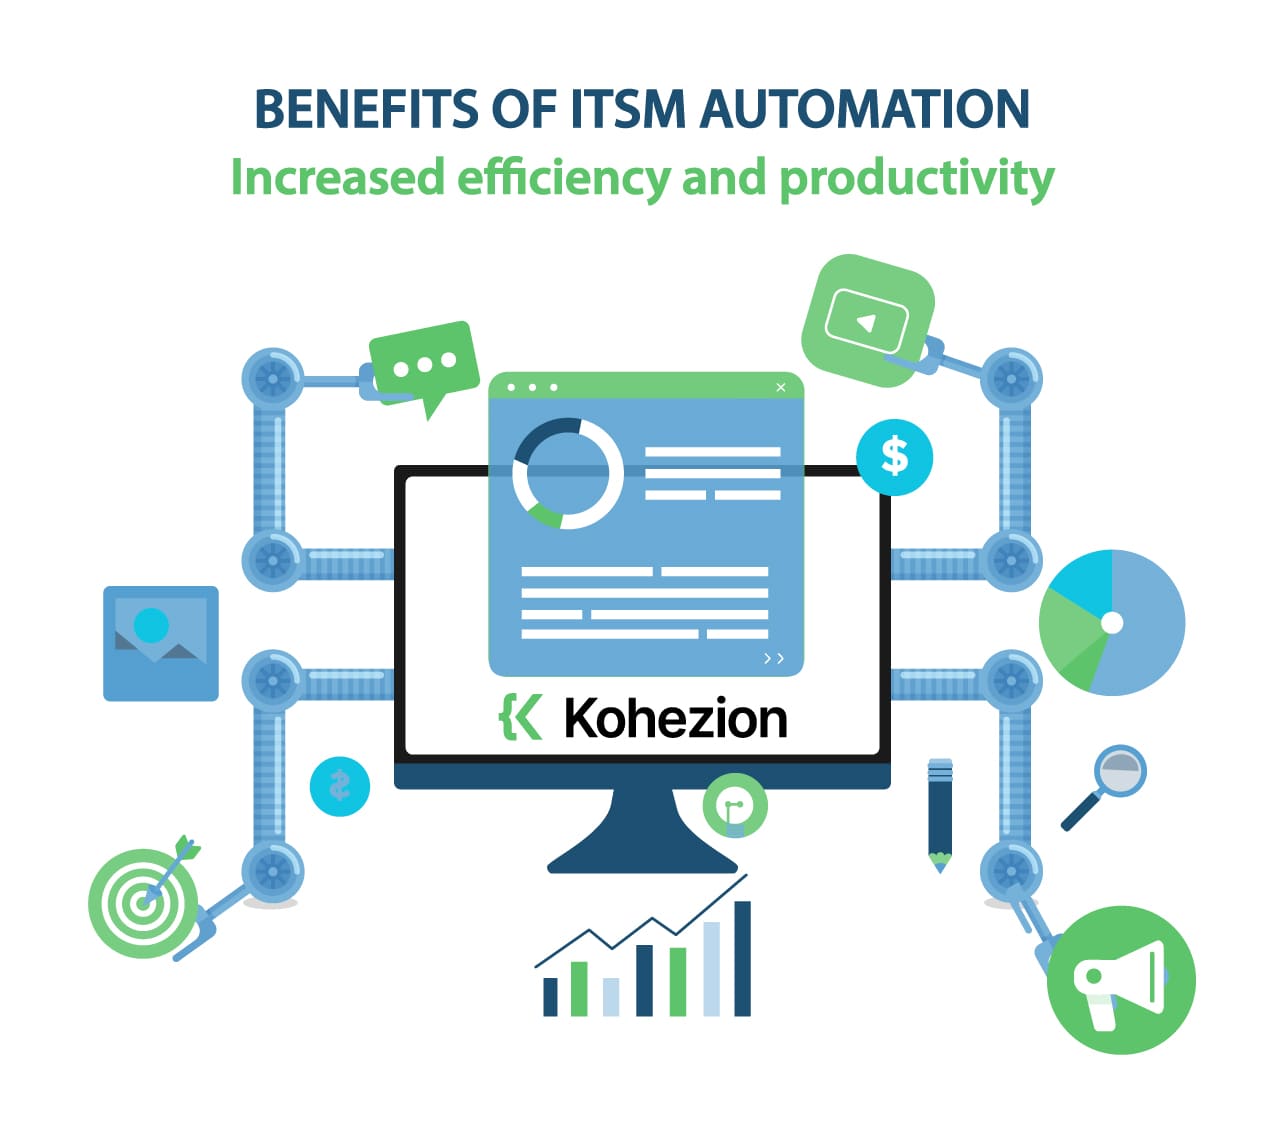 increased efficiency and productivity as Benefits of ITSM Automation